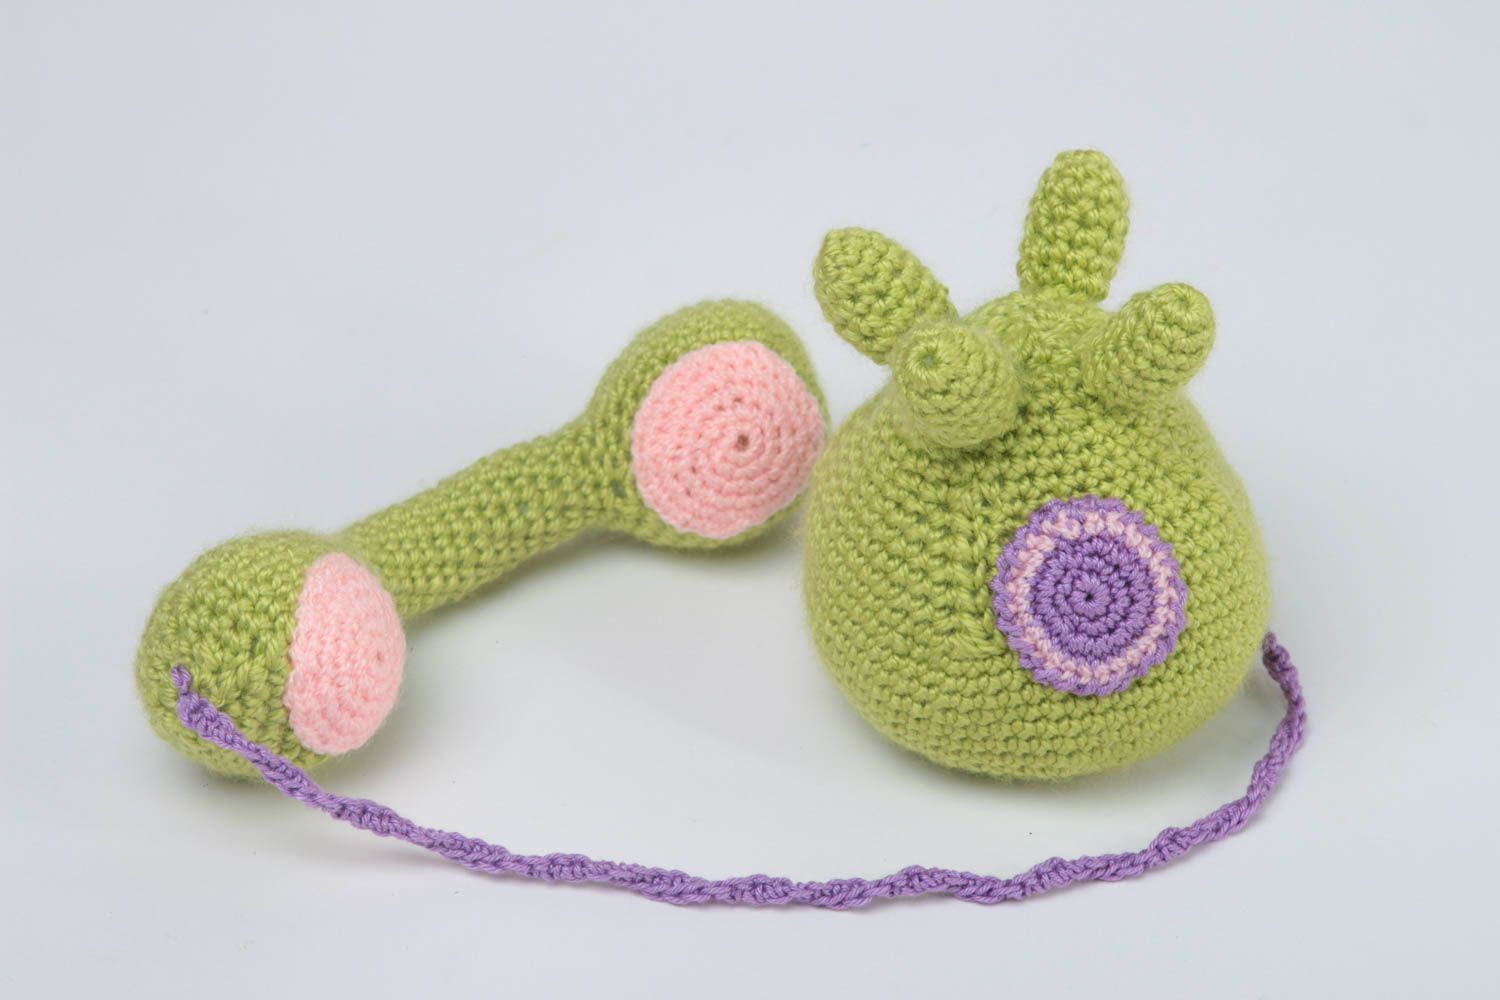 Handmade crocheted toy for children nursery decor stuffed toy for babies photo 3